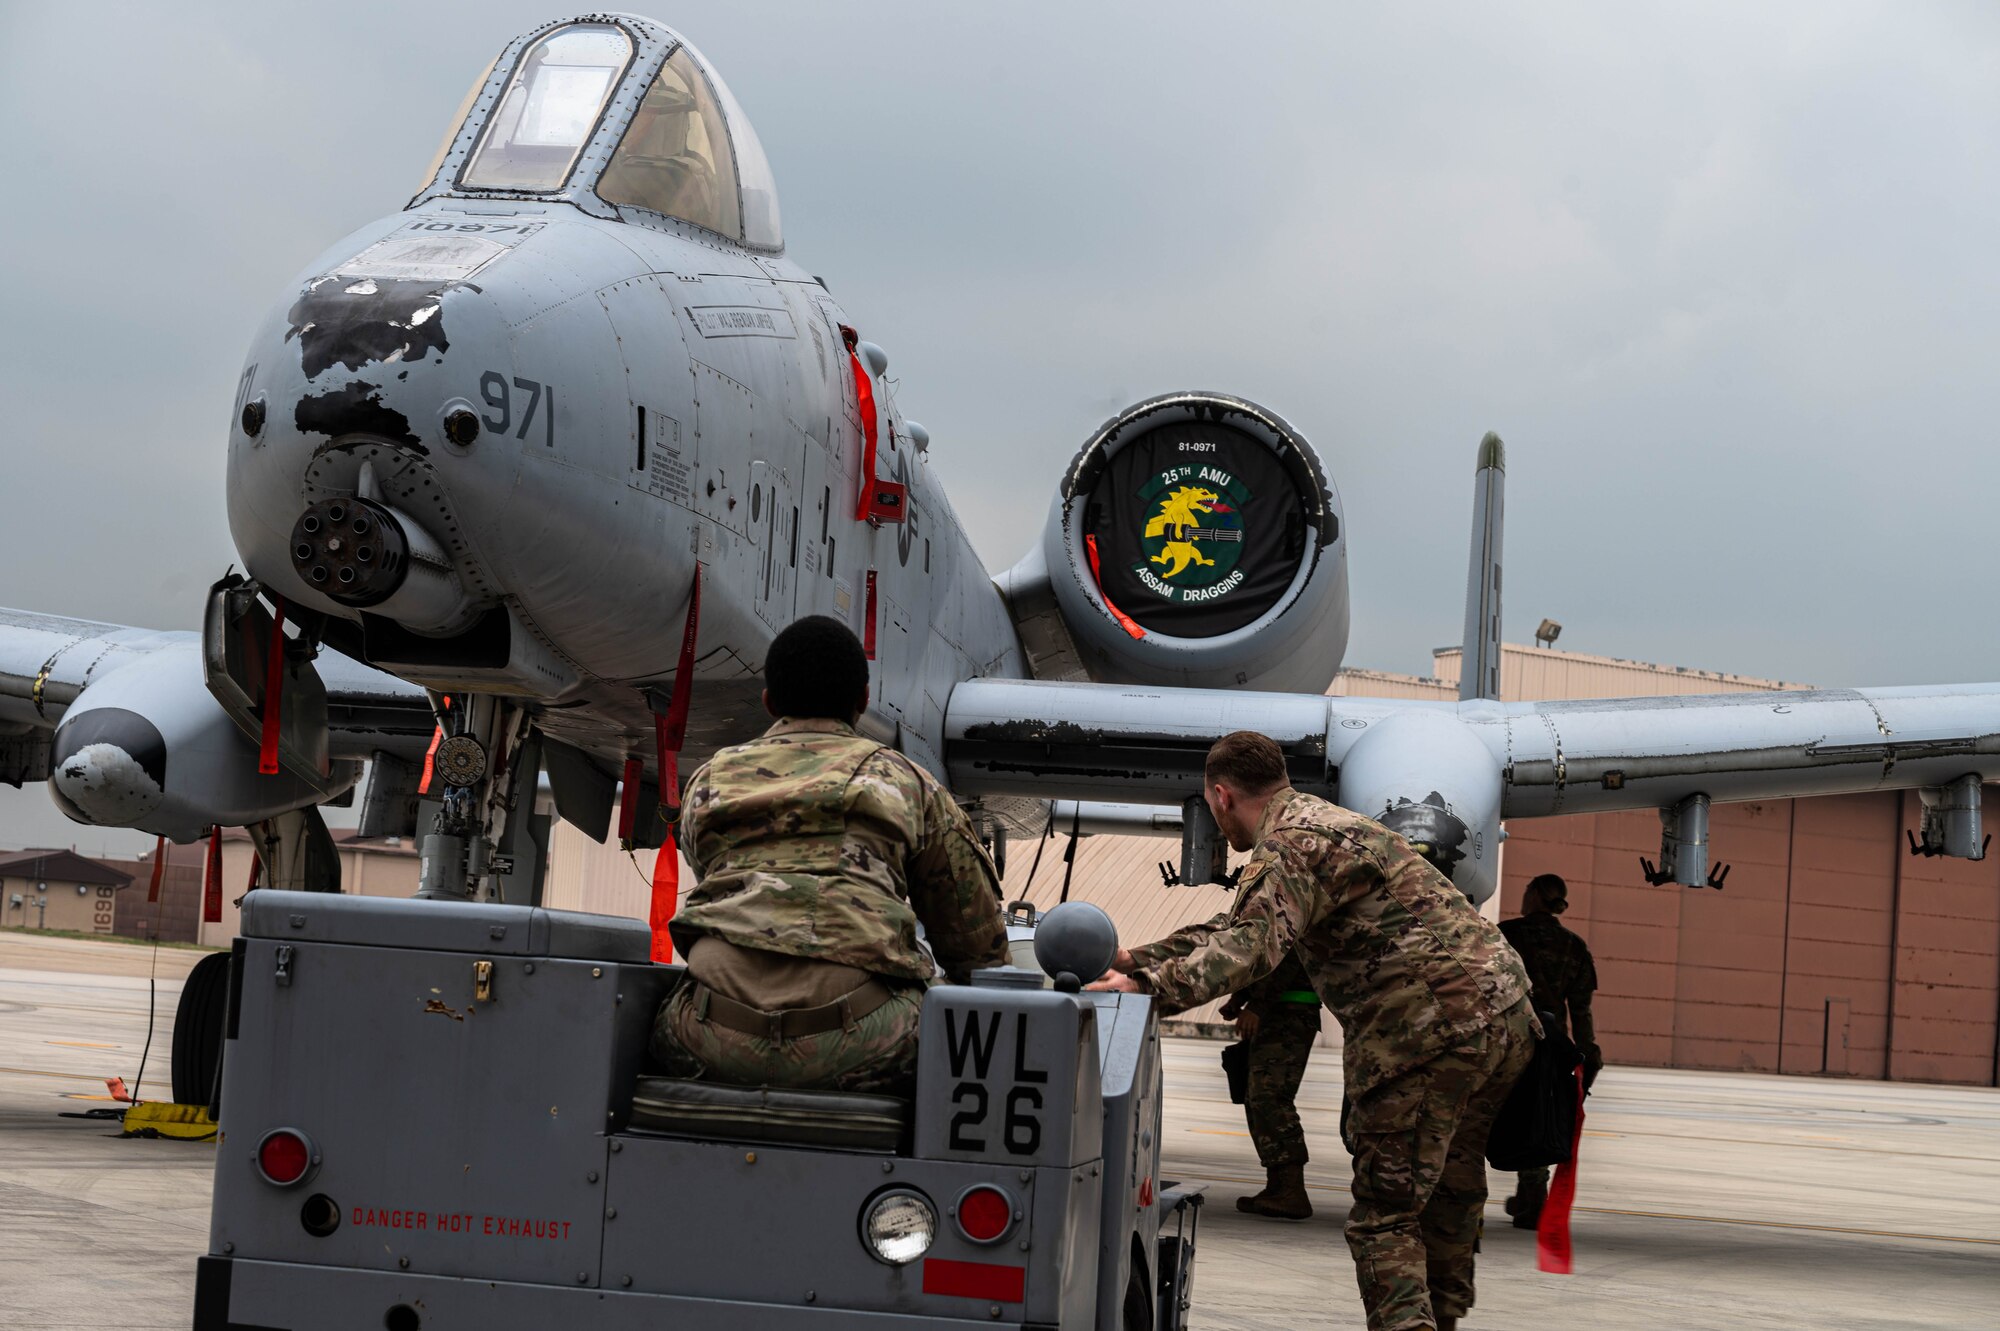 51st Maintenance Group loads a munition onto an A-10 Thunderbolt II “Warthog” at the 3rd quarter load competition